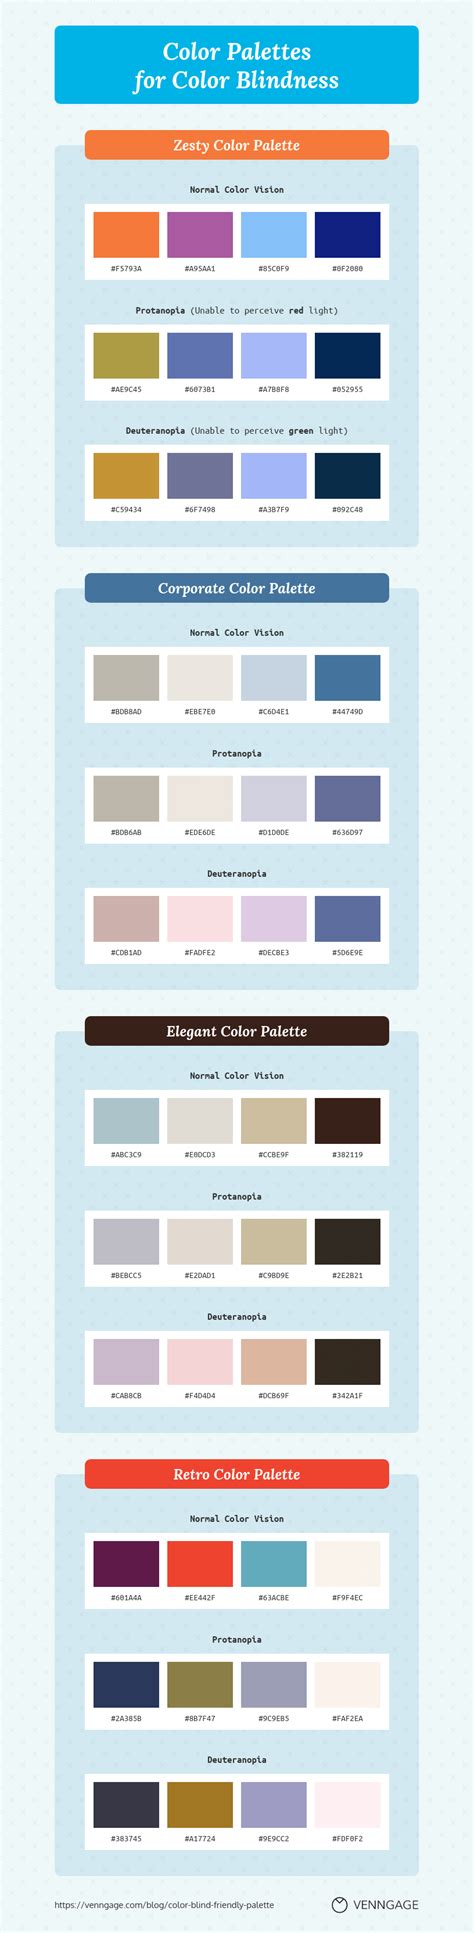 How to Use Color Blind Friendly Palettes to Make Your Charts Accessible